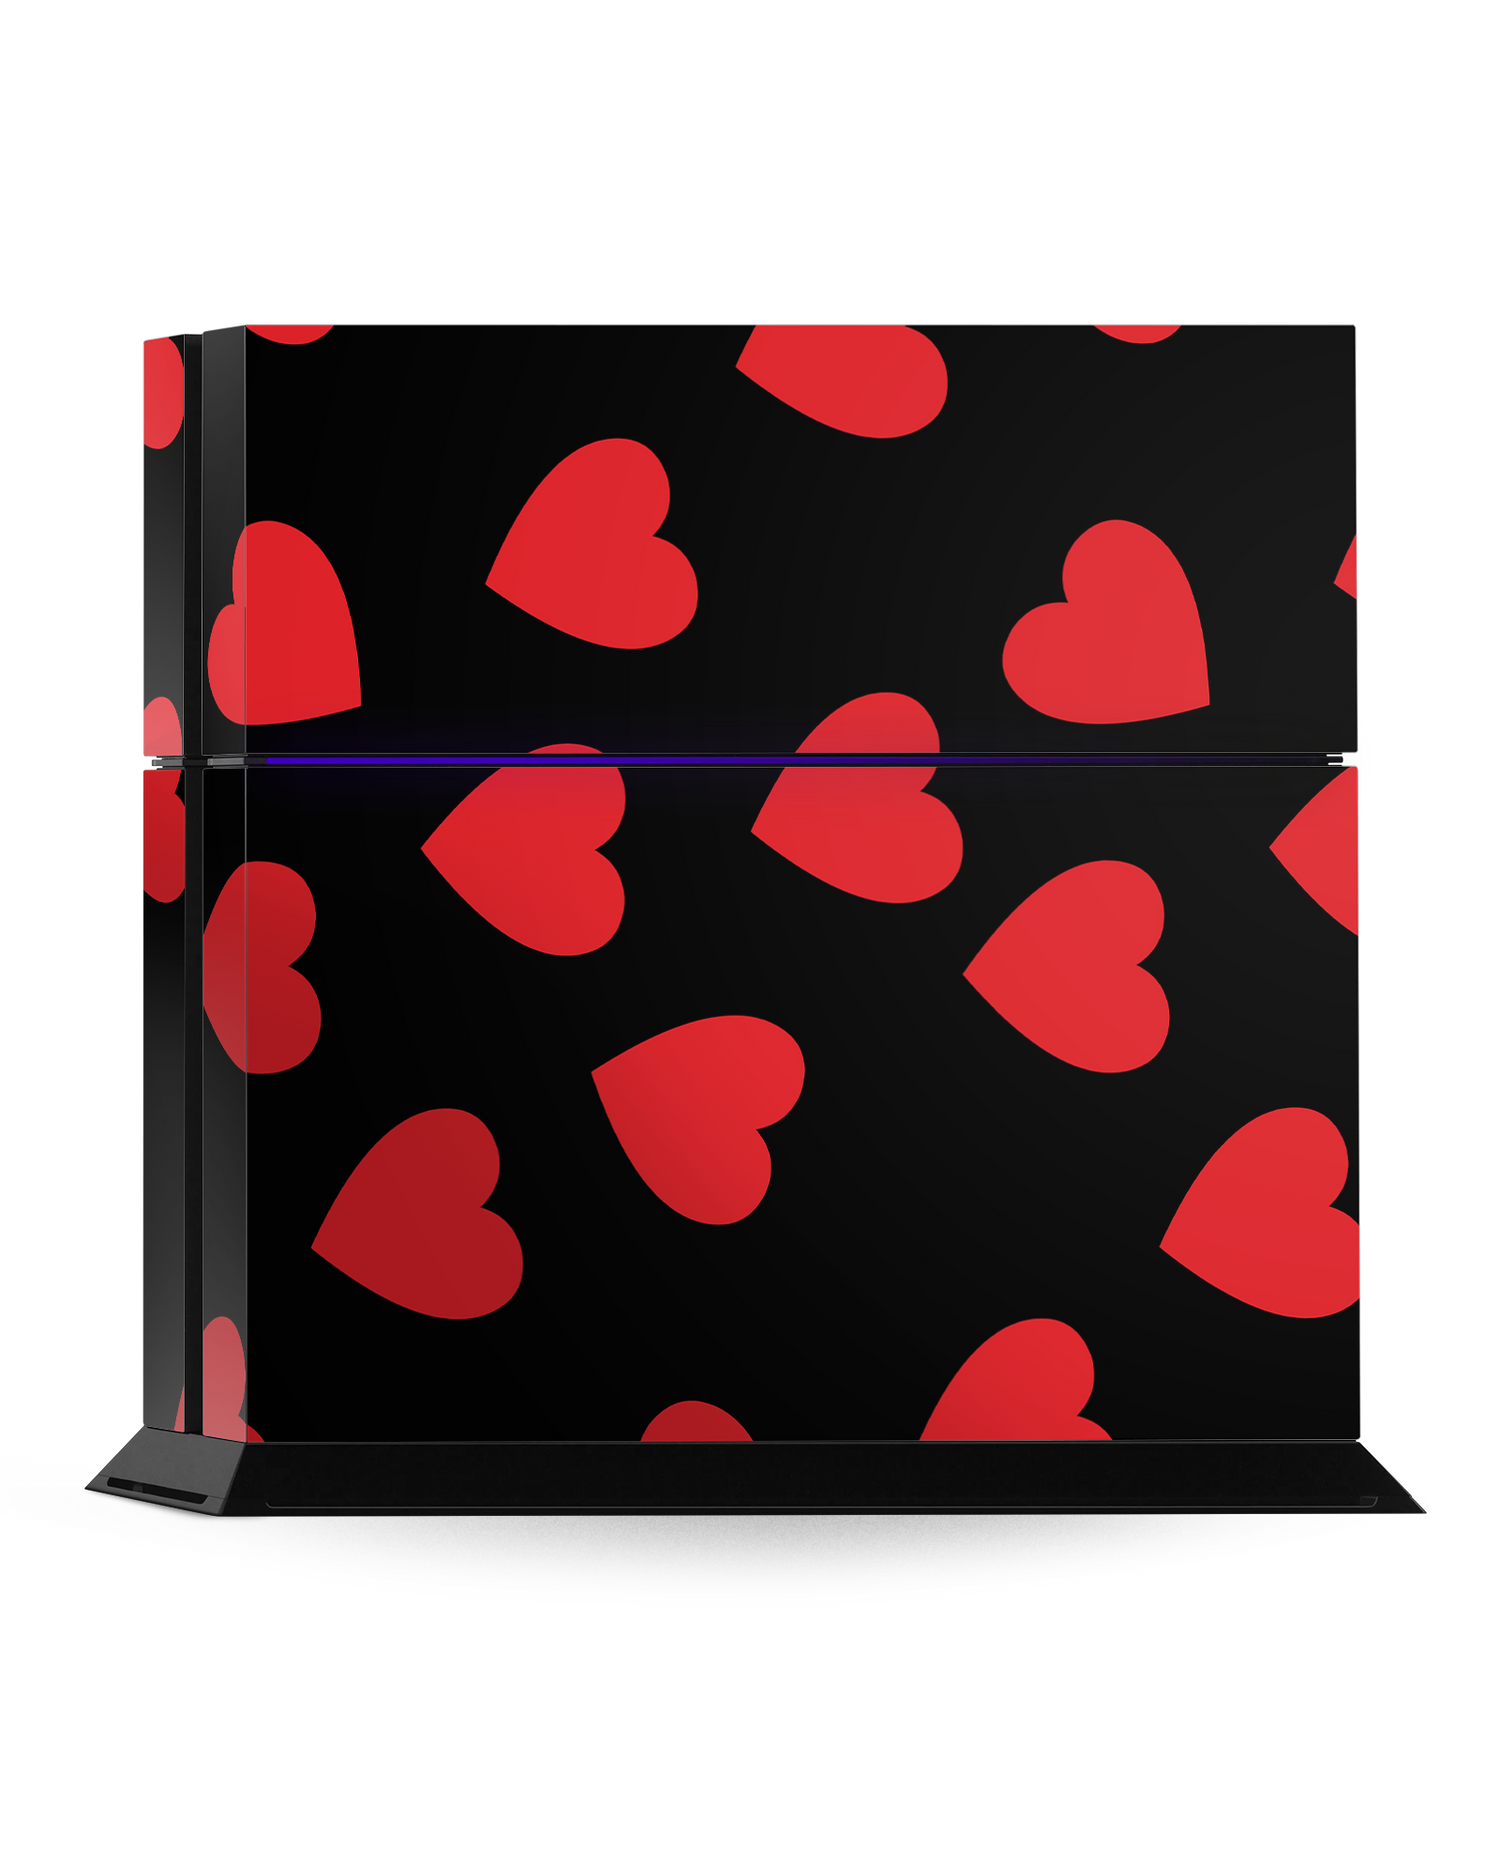 Repeating Hearts Console Skin for Sony PlayStation 4: Standing